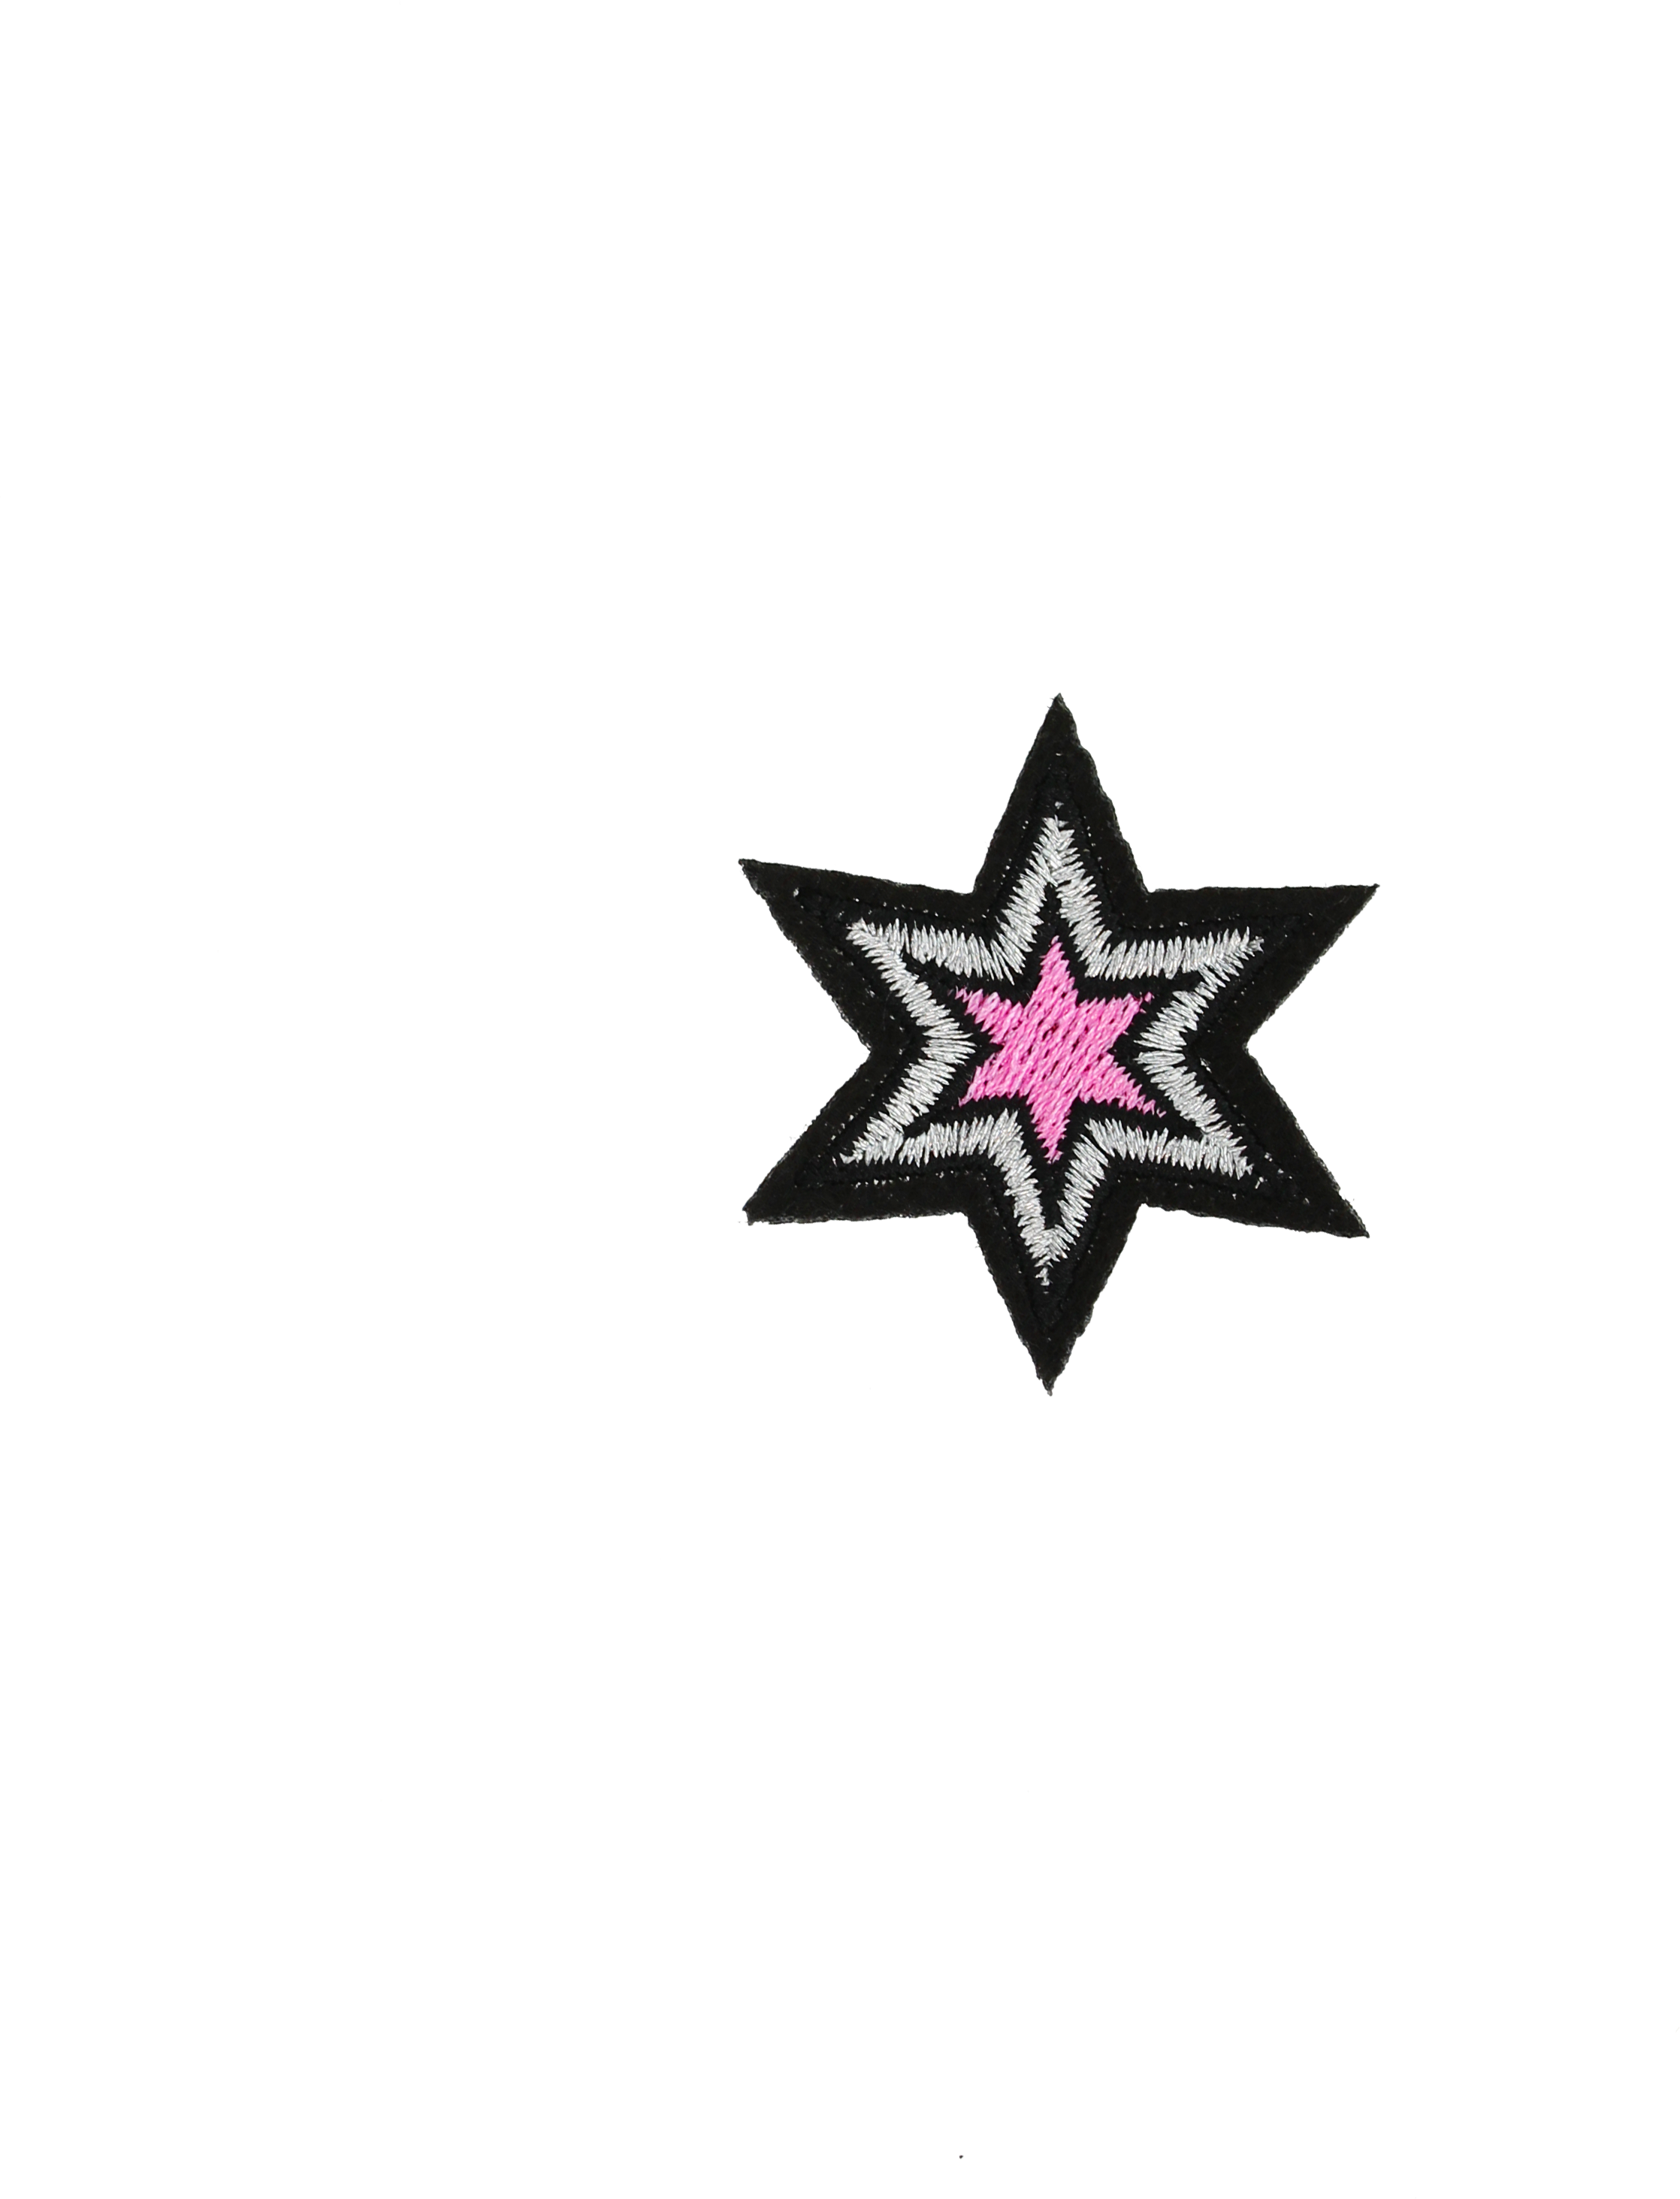 A Black And Pink Star With White And Pink Stitching